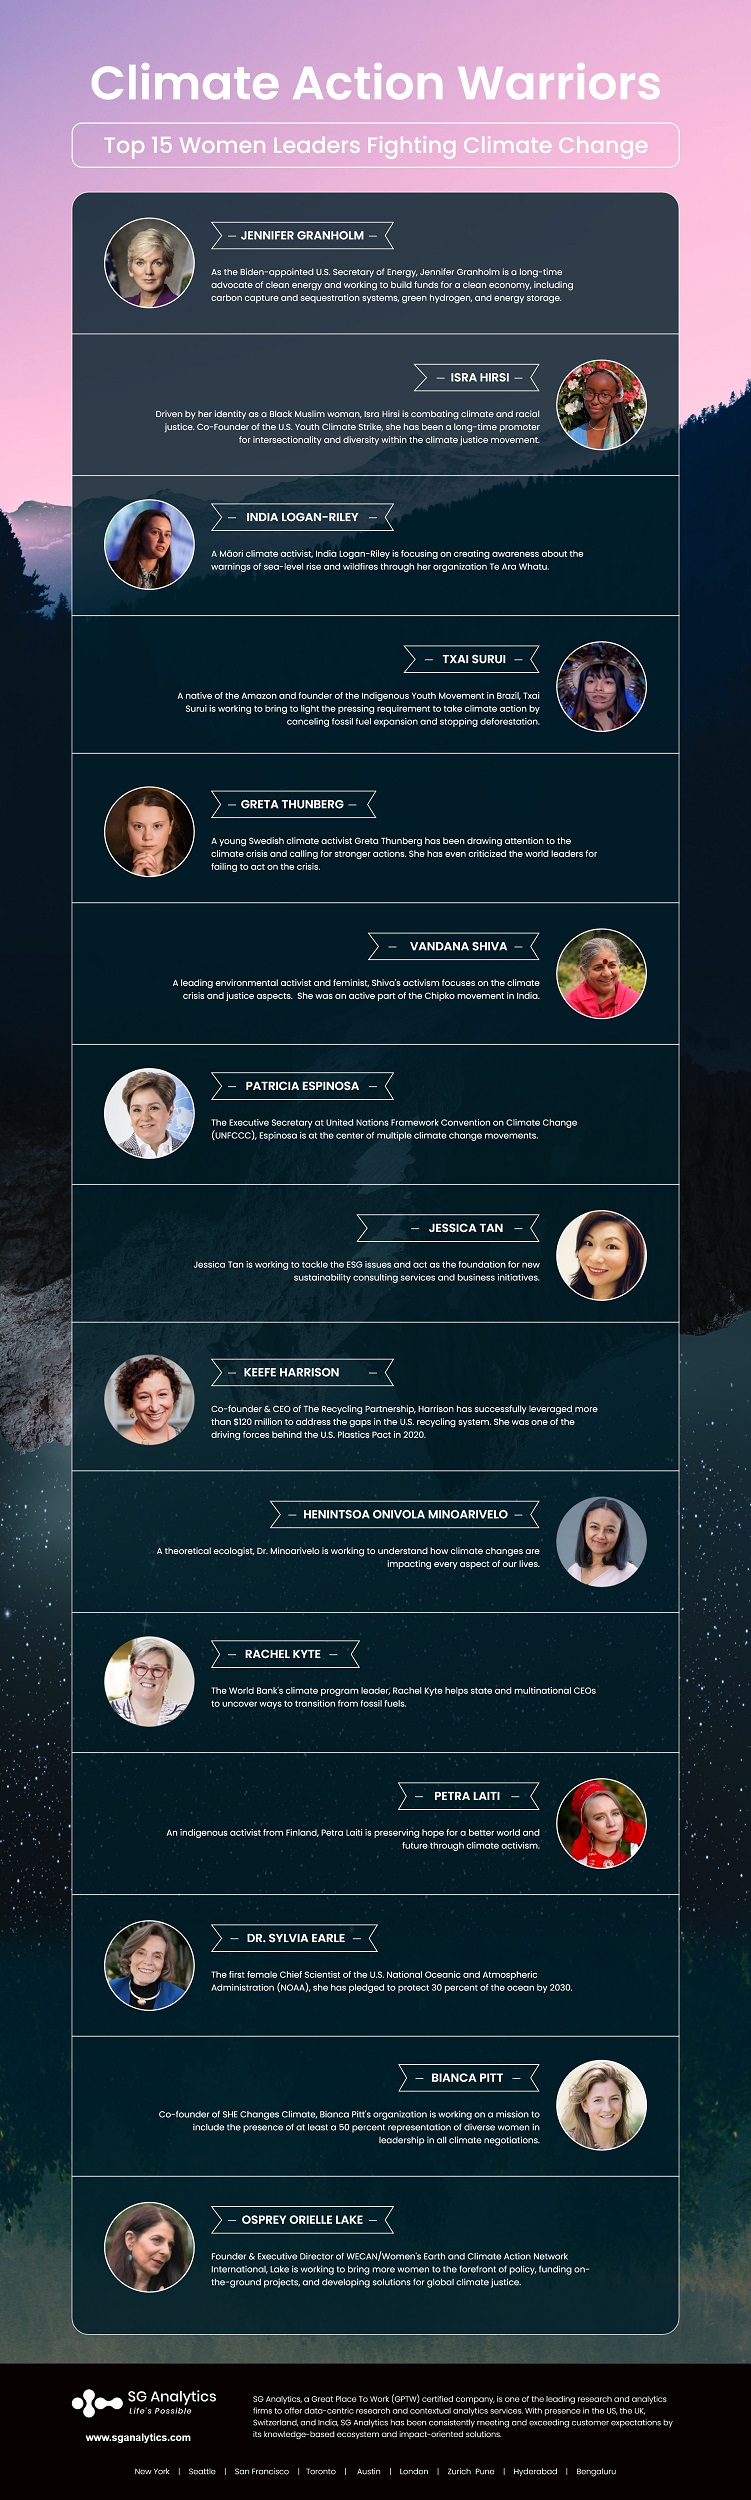 climate action warriors - infographic